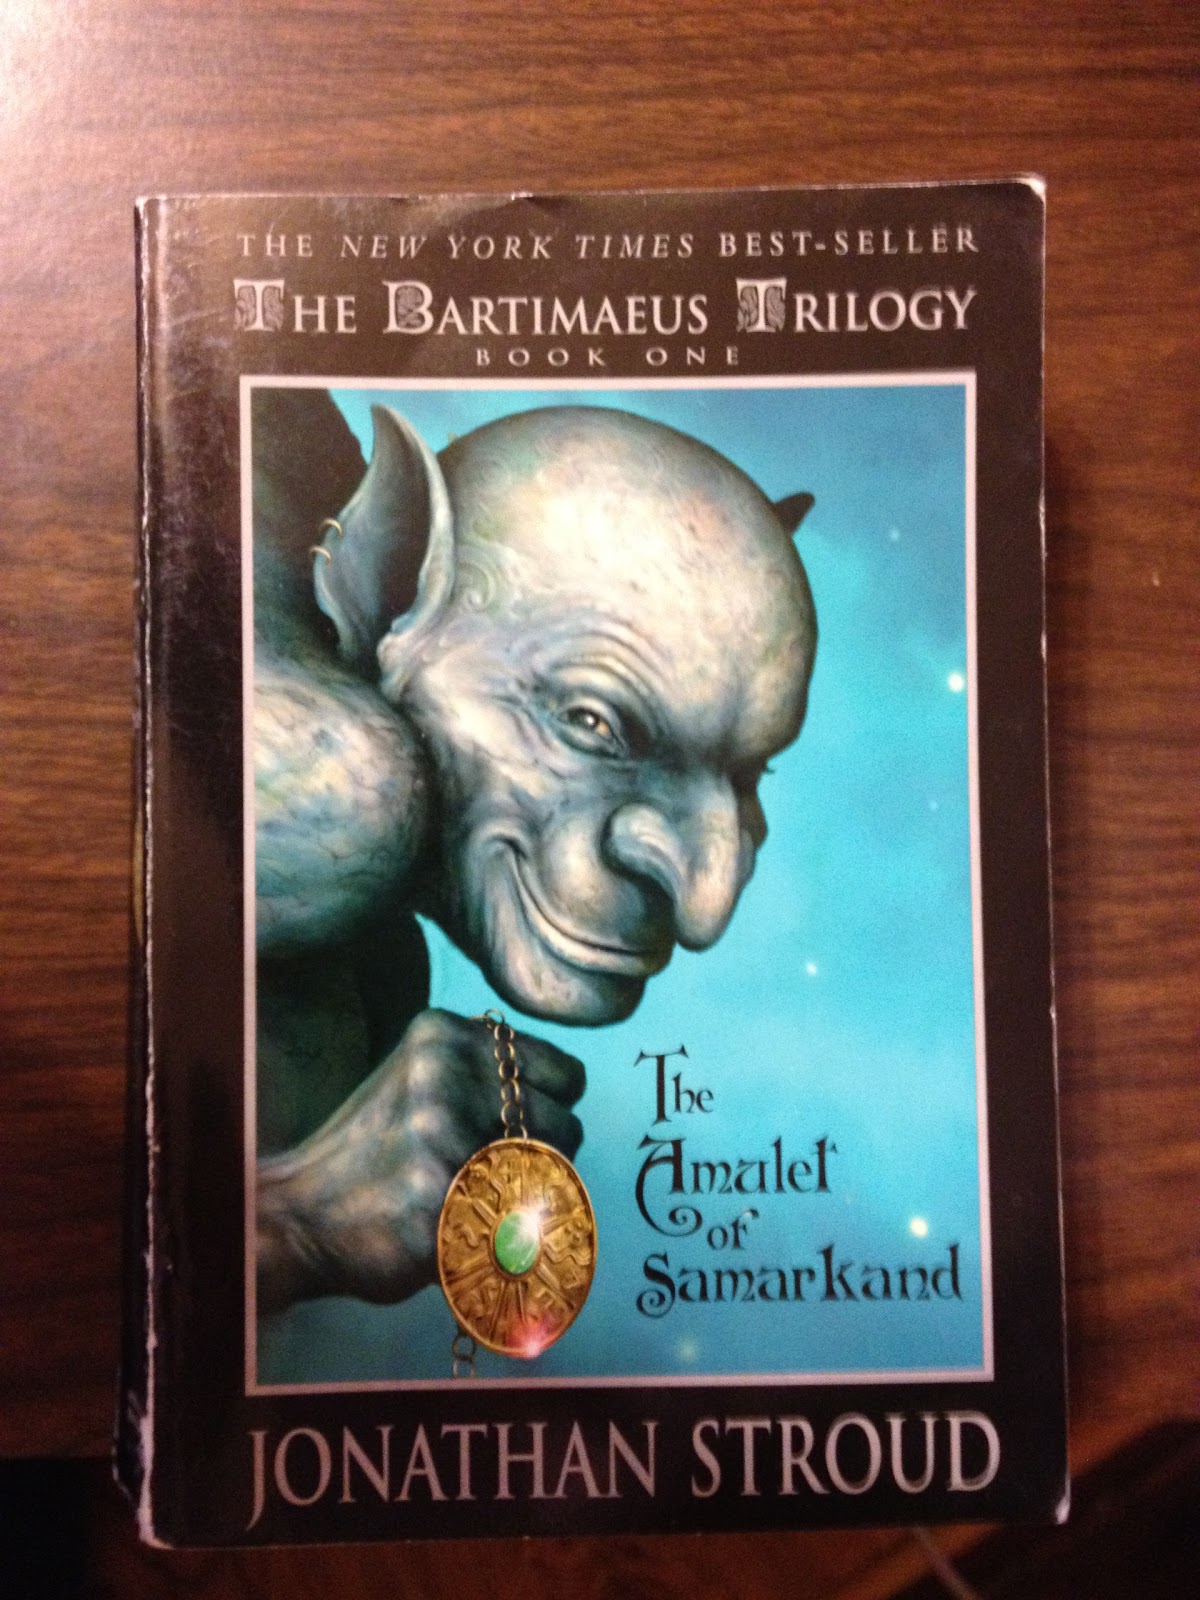 LitPool The Bartimaeus Sequence The Amulet of Samarkand